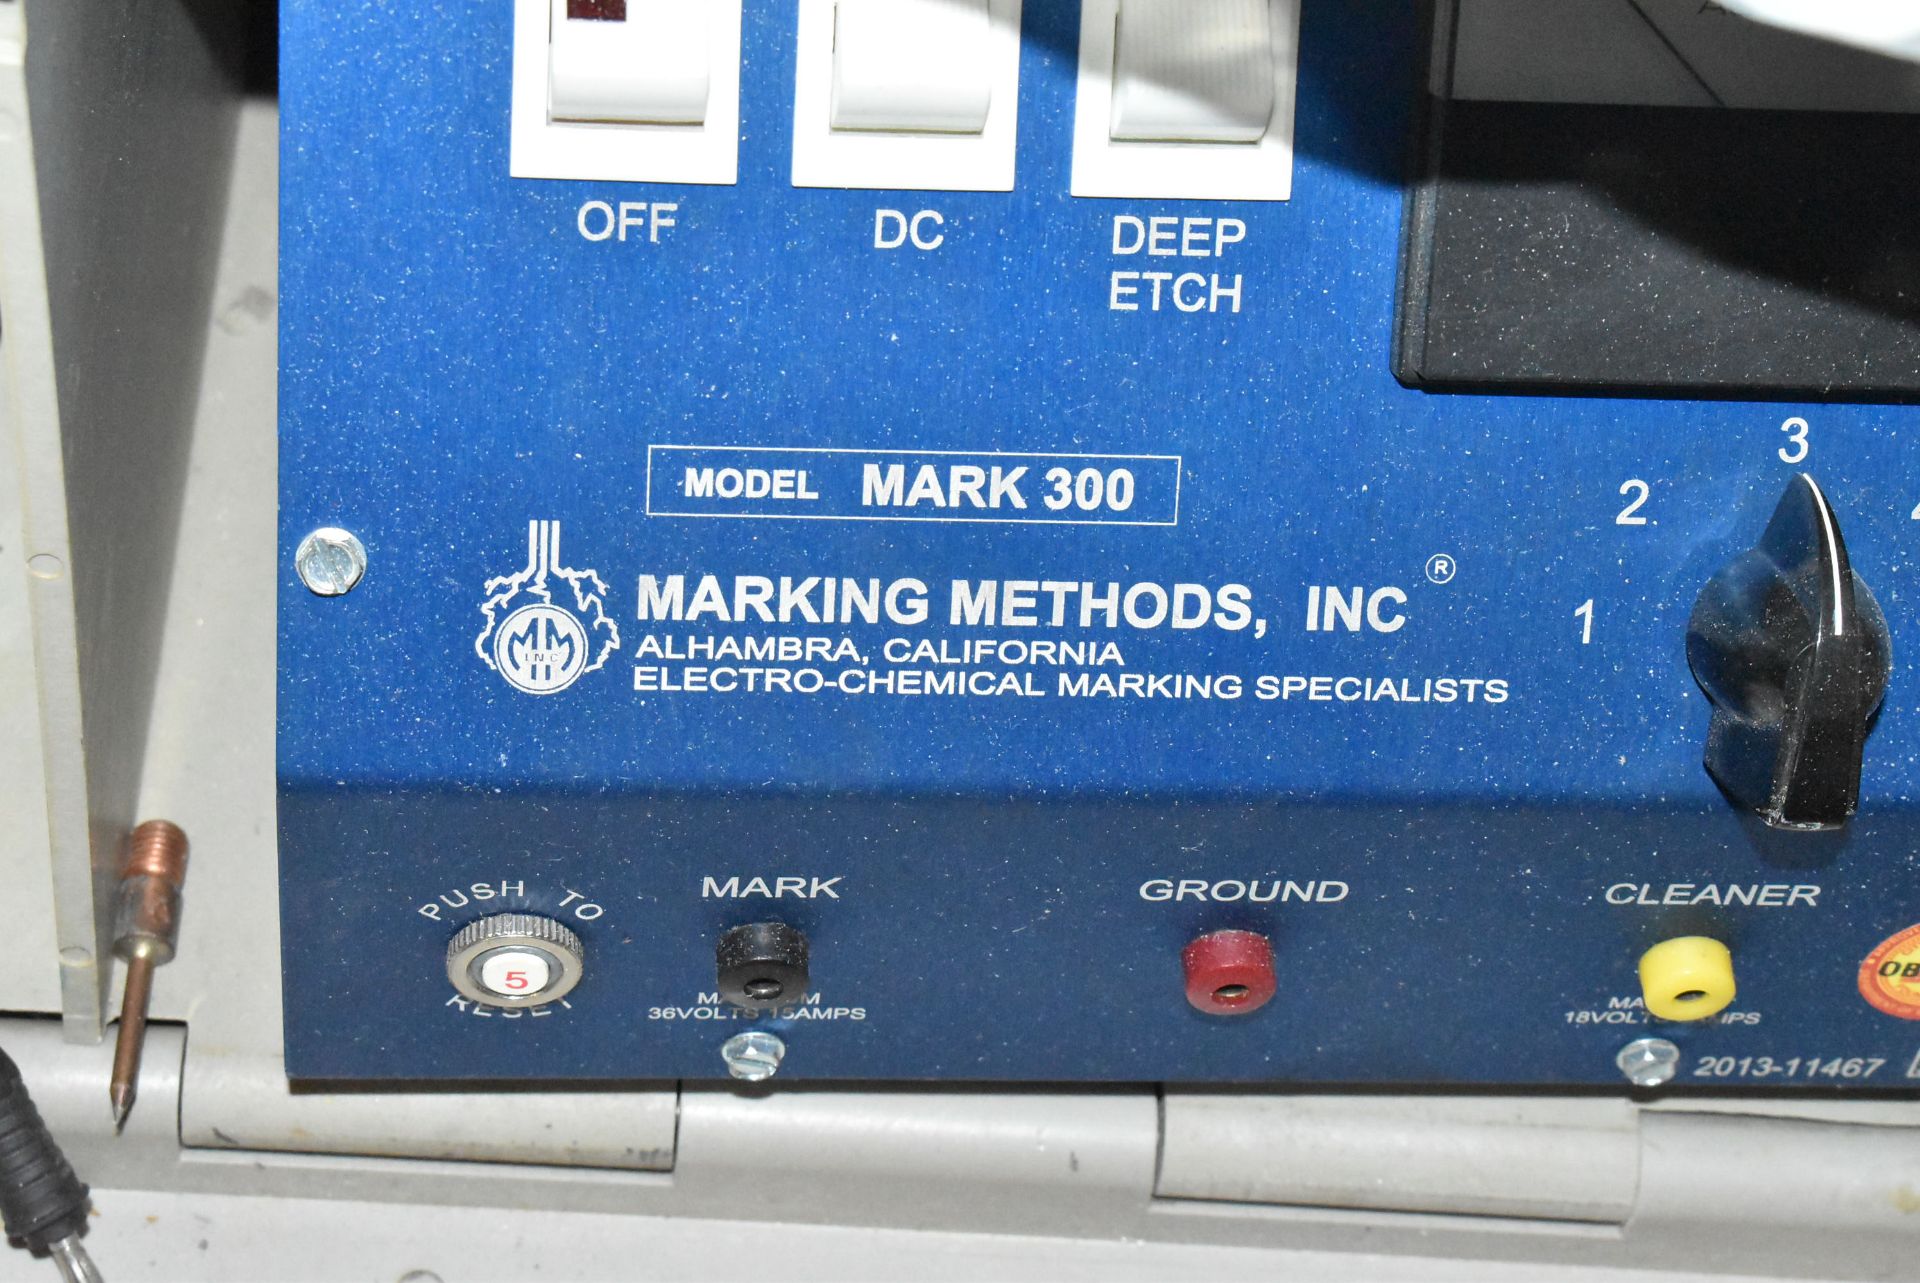 MARKING METHODS MARK 300 PORTABLE ELECTRO-CHEMICAL MARKING UNIT, S/N: N/A - Image 3 of 4